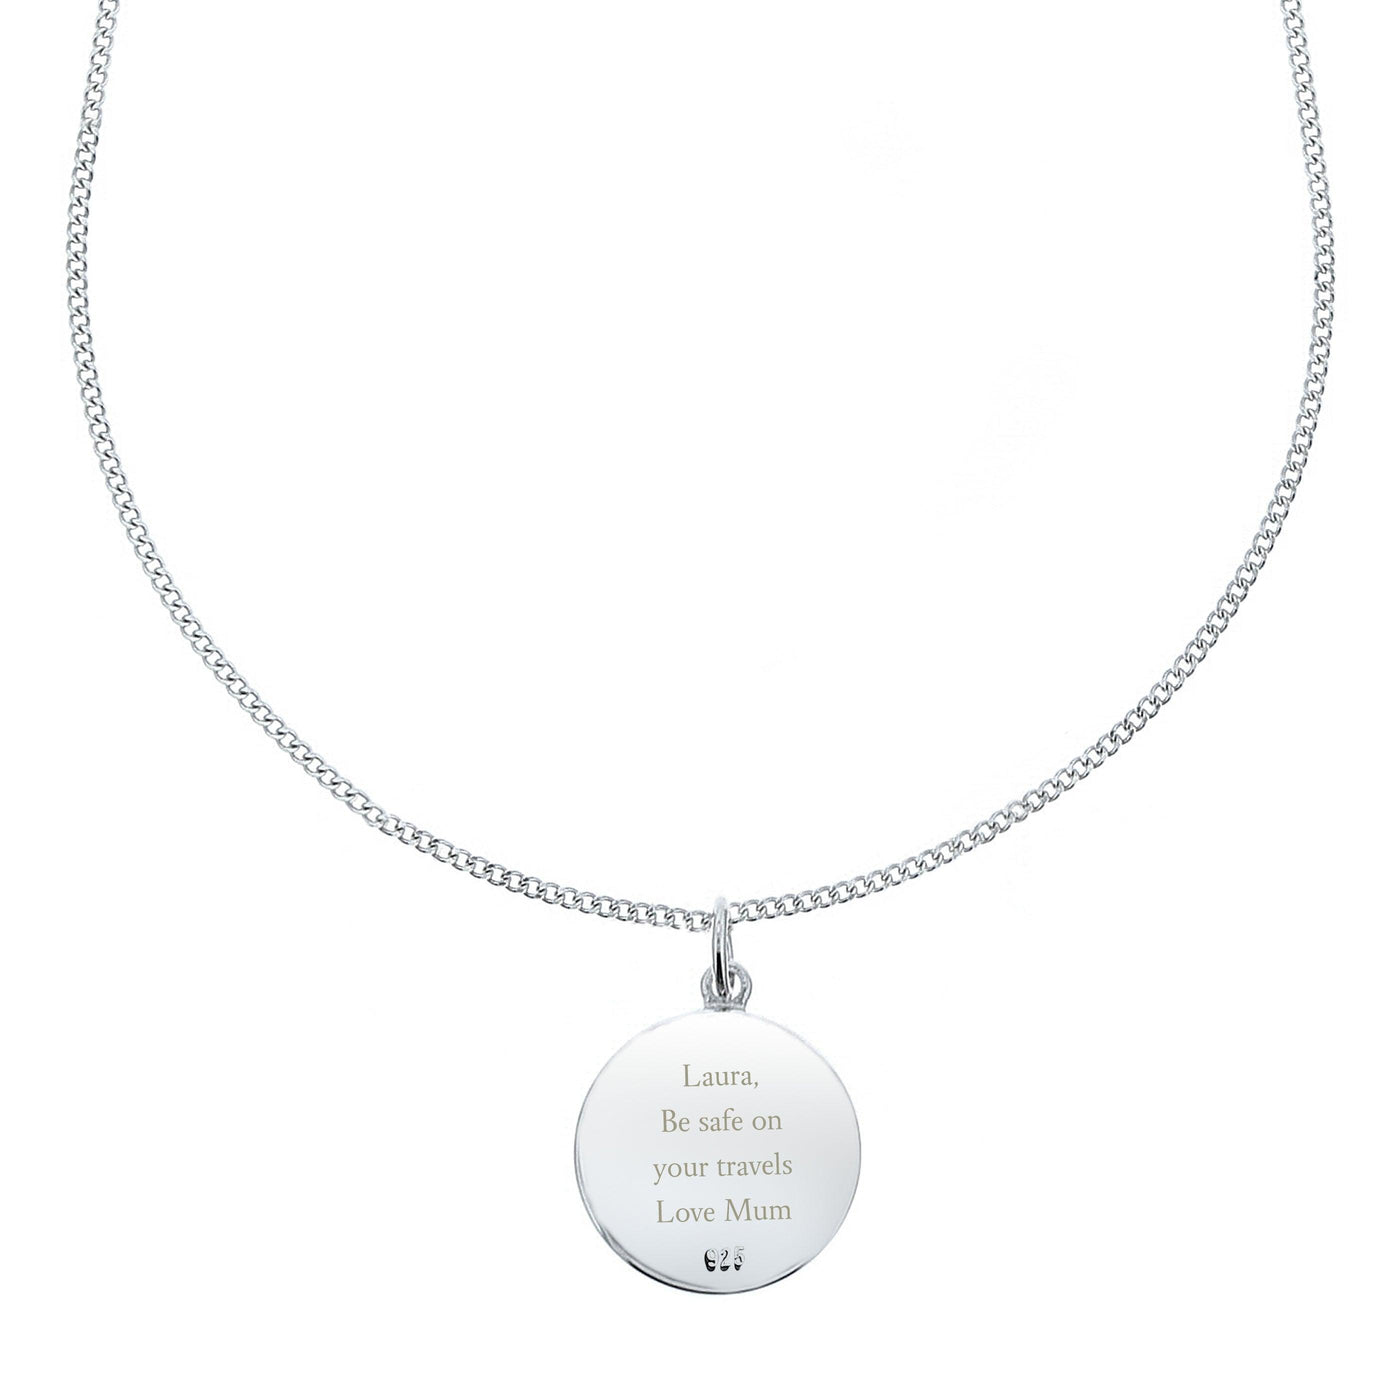 Personalised Sterling Silver & 9ct Gold St. Christopher Necklace - Shop Personalised Gifts